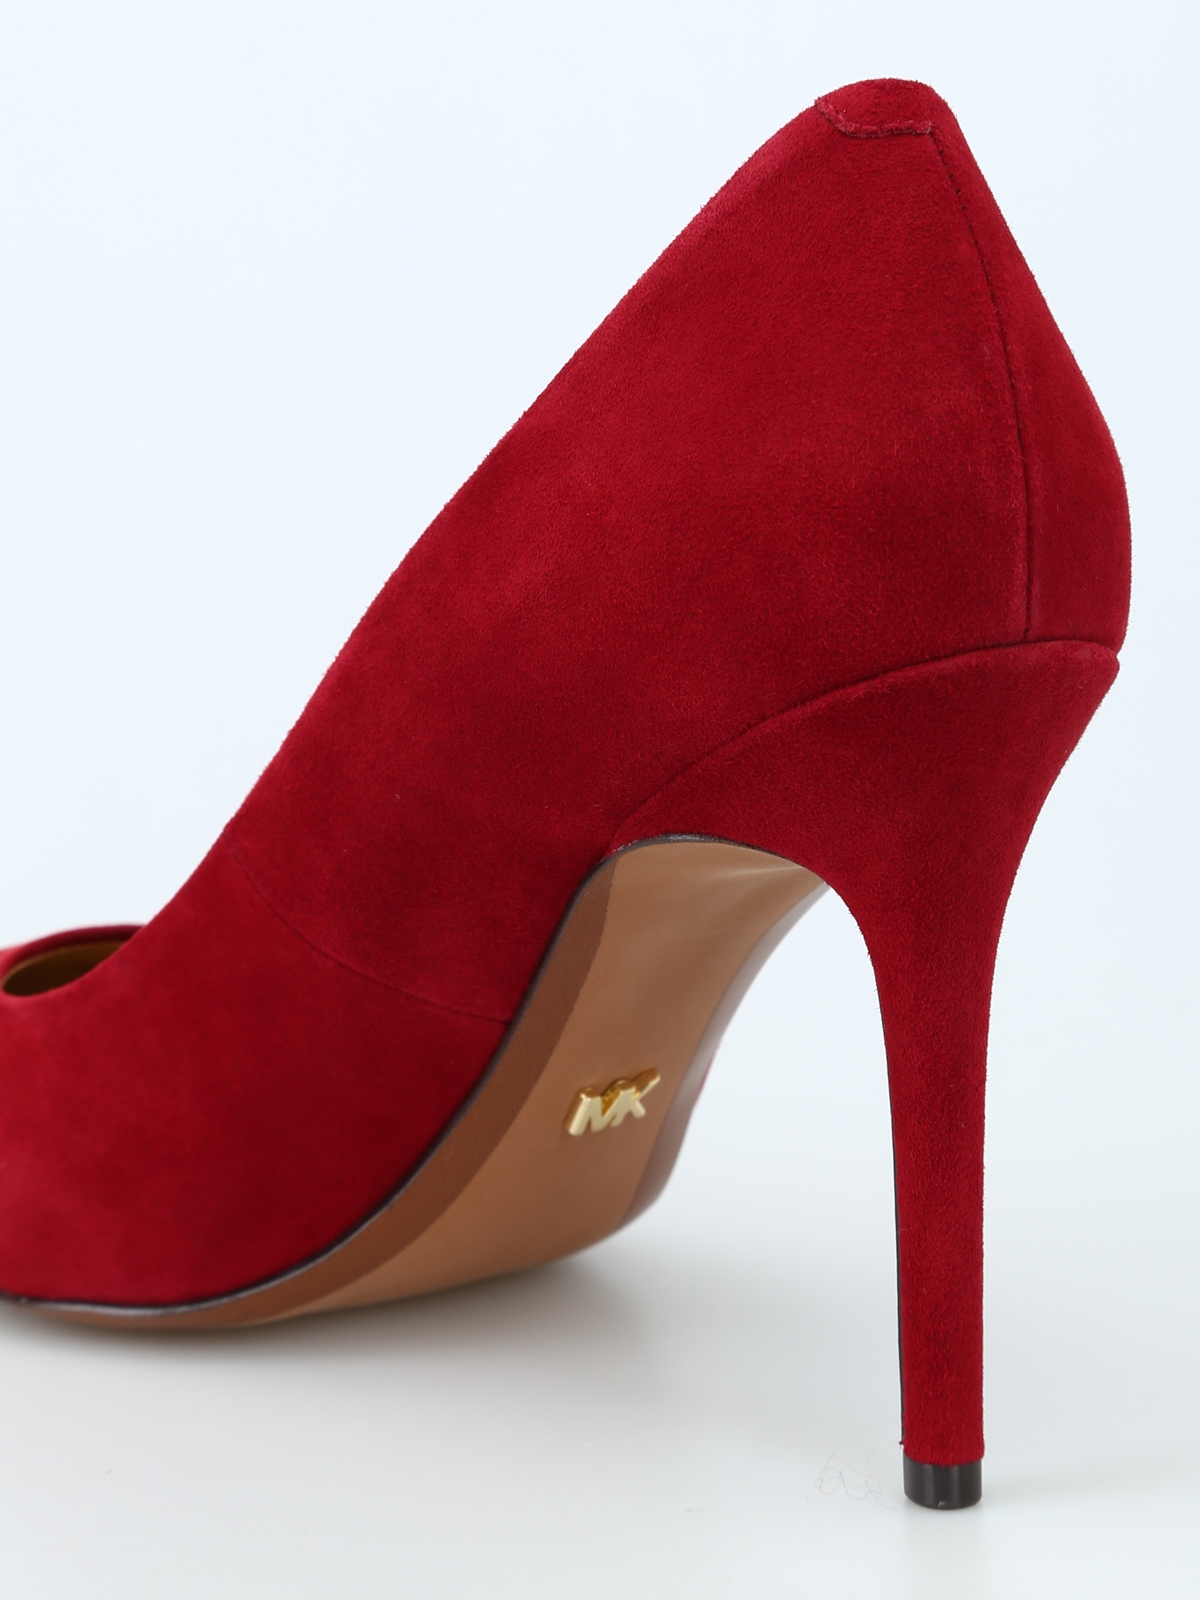 Michael Kors - Claire pointy toe suede 